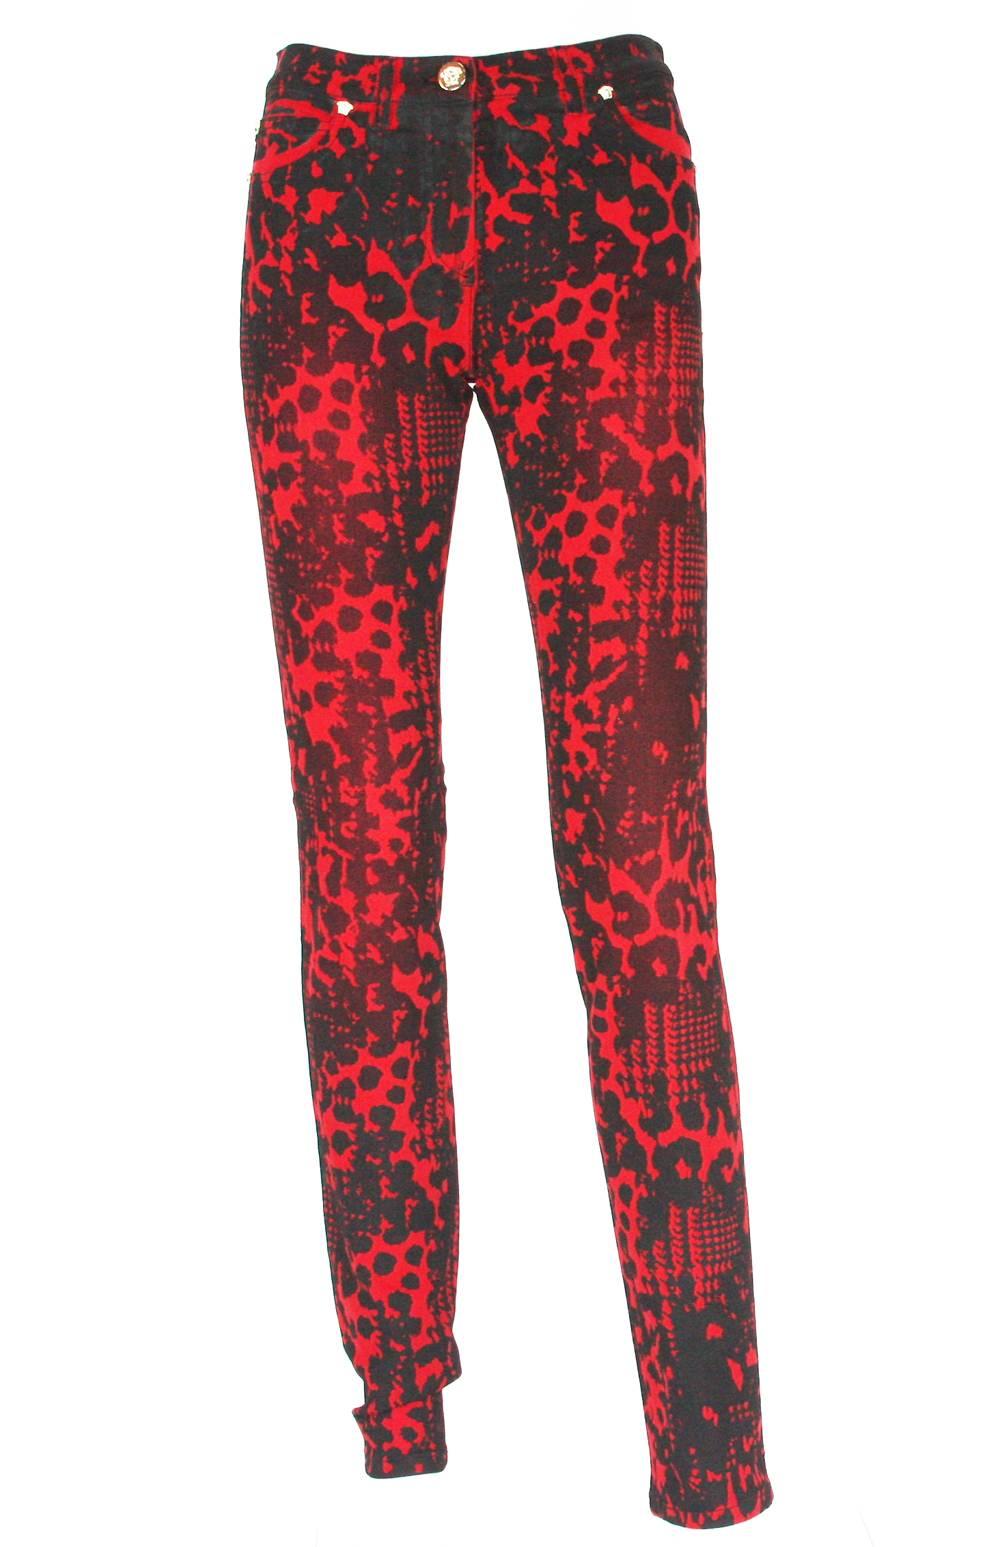 NEW VERSACE WOMEN'S RED BLACK DENIM JEANS
DESIGNER SIZES AVAILABLE - 24,25.
LEOPARD GRAPHIC PRINT, GOLD TONE METAL MEDUSA STUDS
BLACK LEATHER PATCH WITH GOLD TONE METAL MEDUSA 3-D HEAD
5 STYLE POCKETS, 98% COTTON, 2% ELASTANE
MEASUREMENTS: 
Size 24